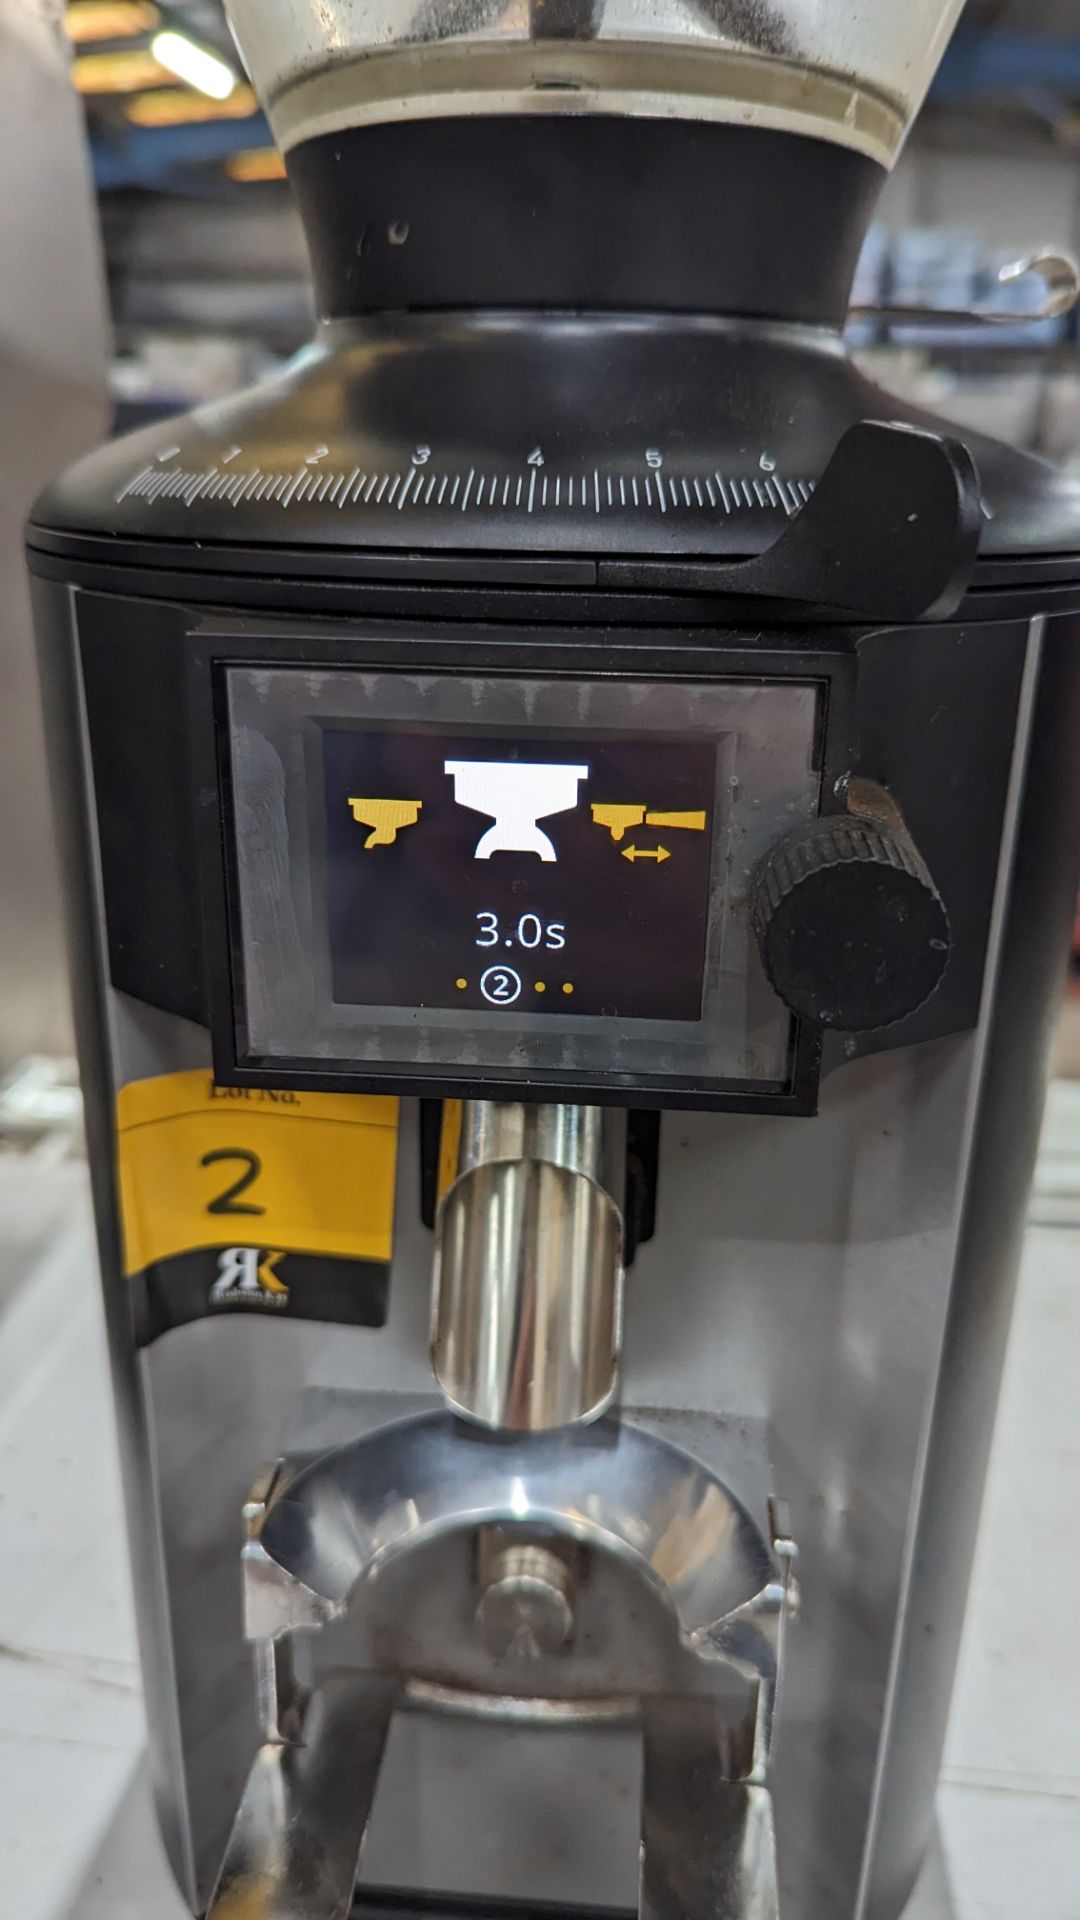 Anfim Pratica commercial coffee grinder with digital display, model AE652.4B - Image 7 of 17